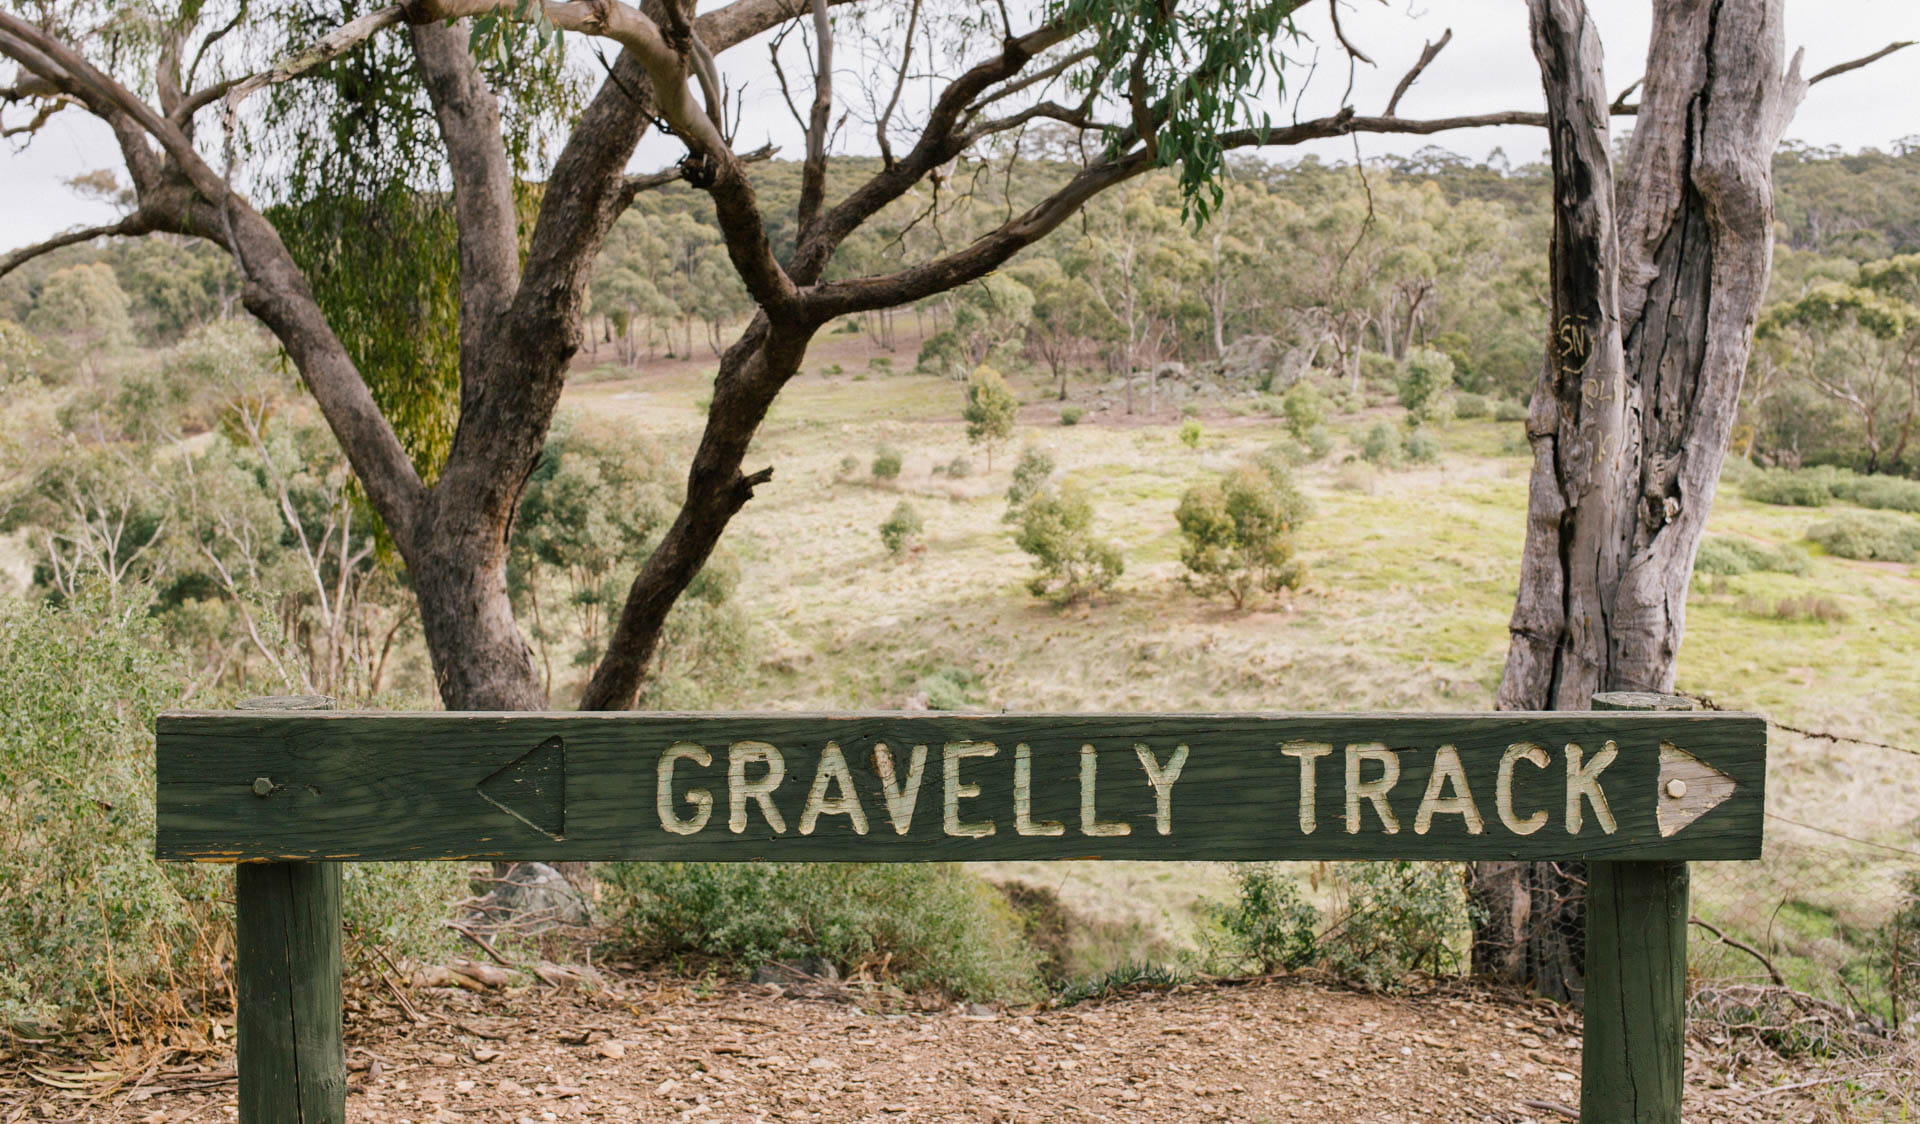 A forested area. In the foreground a green wooden sign that reads: Gravelly Track.